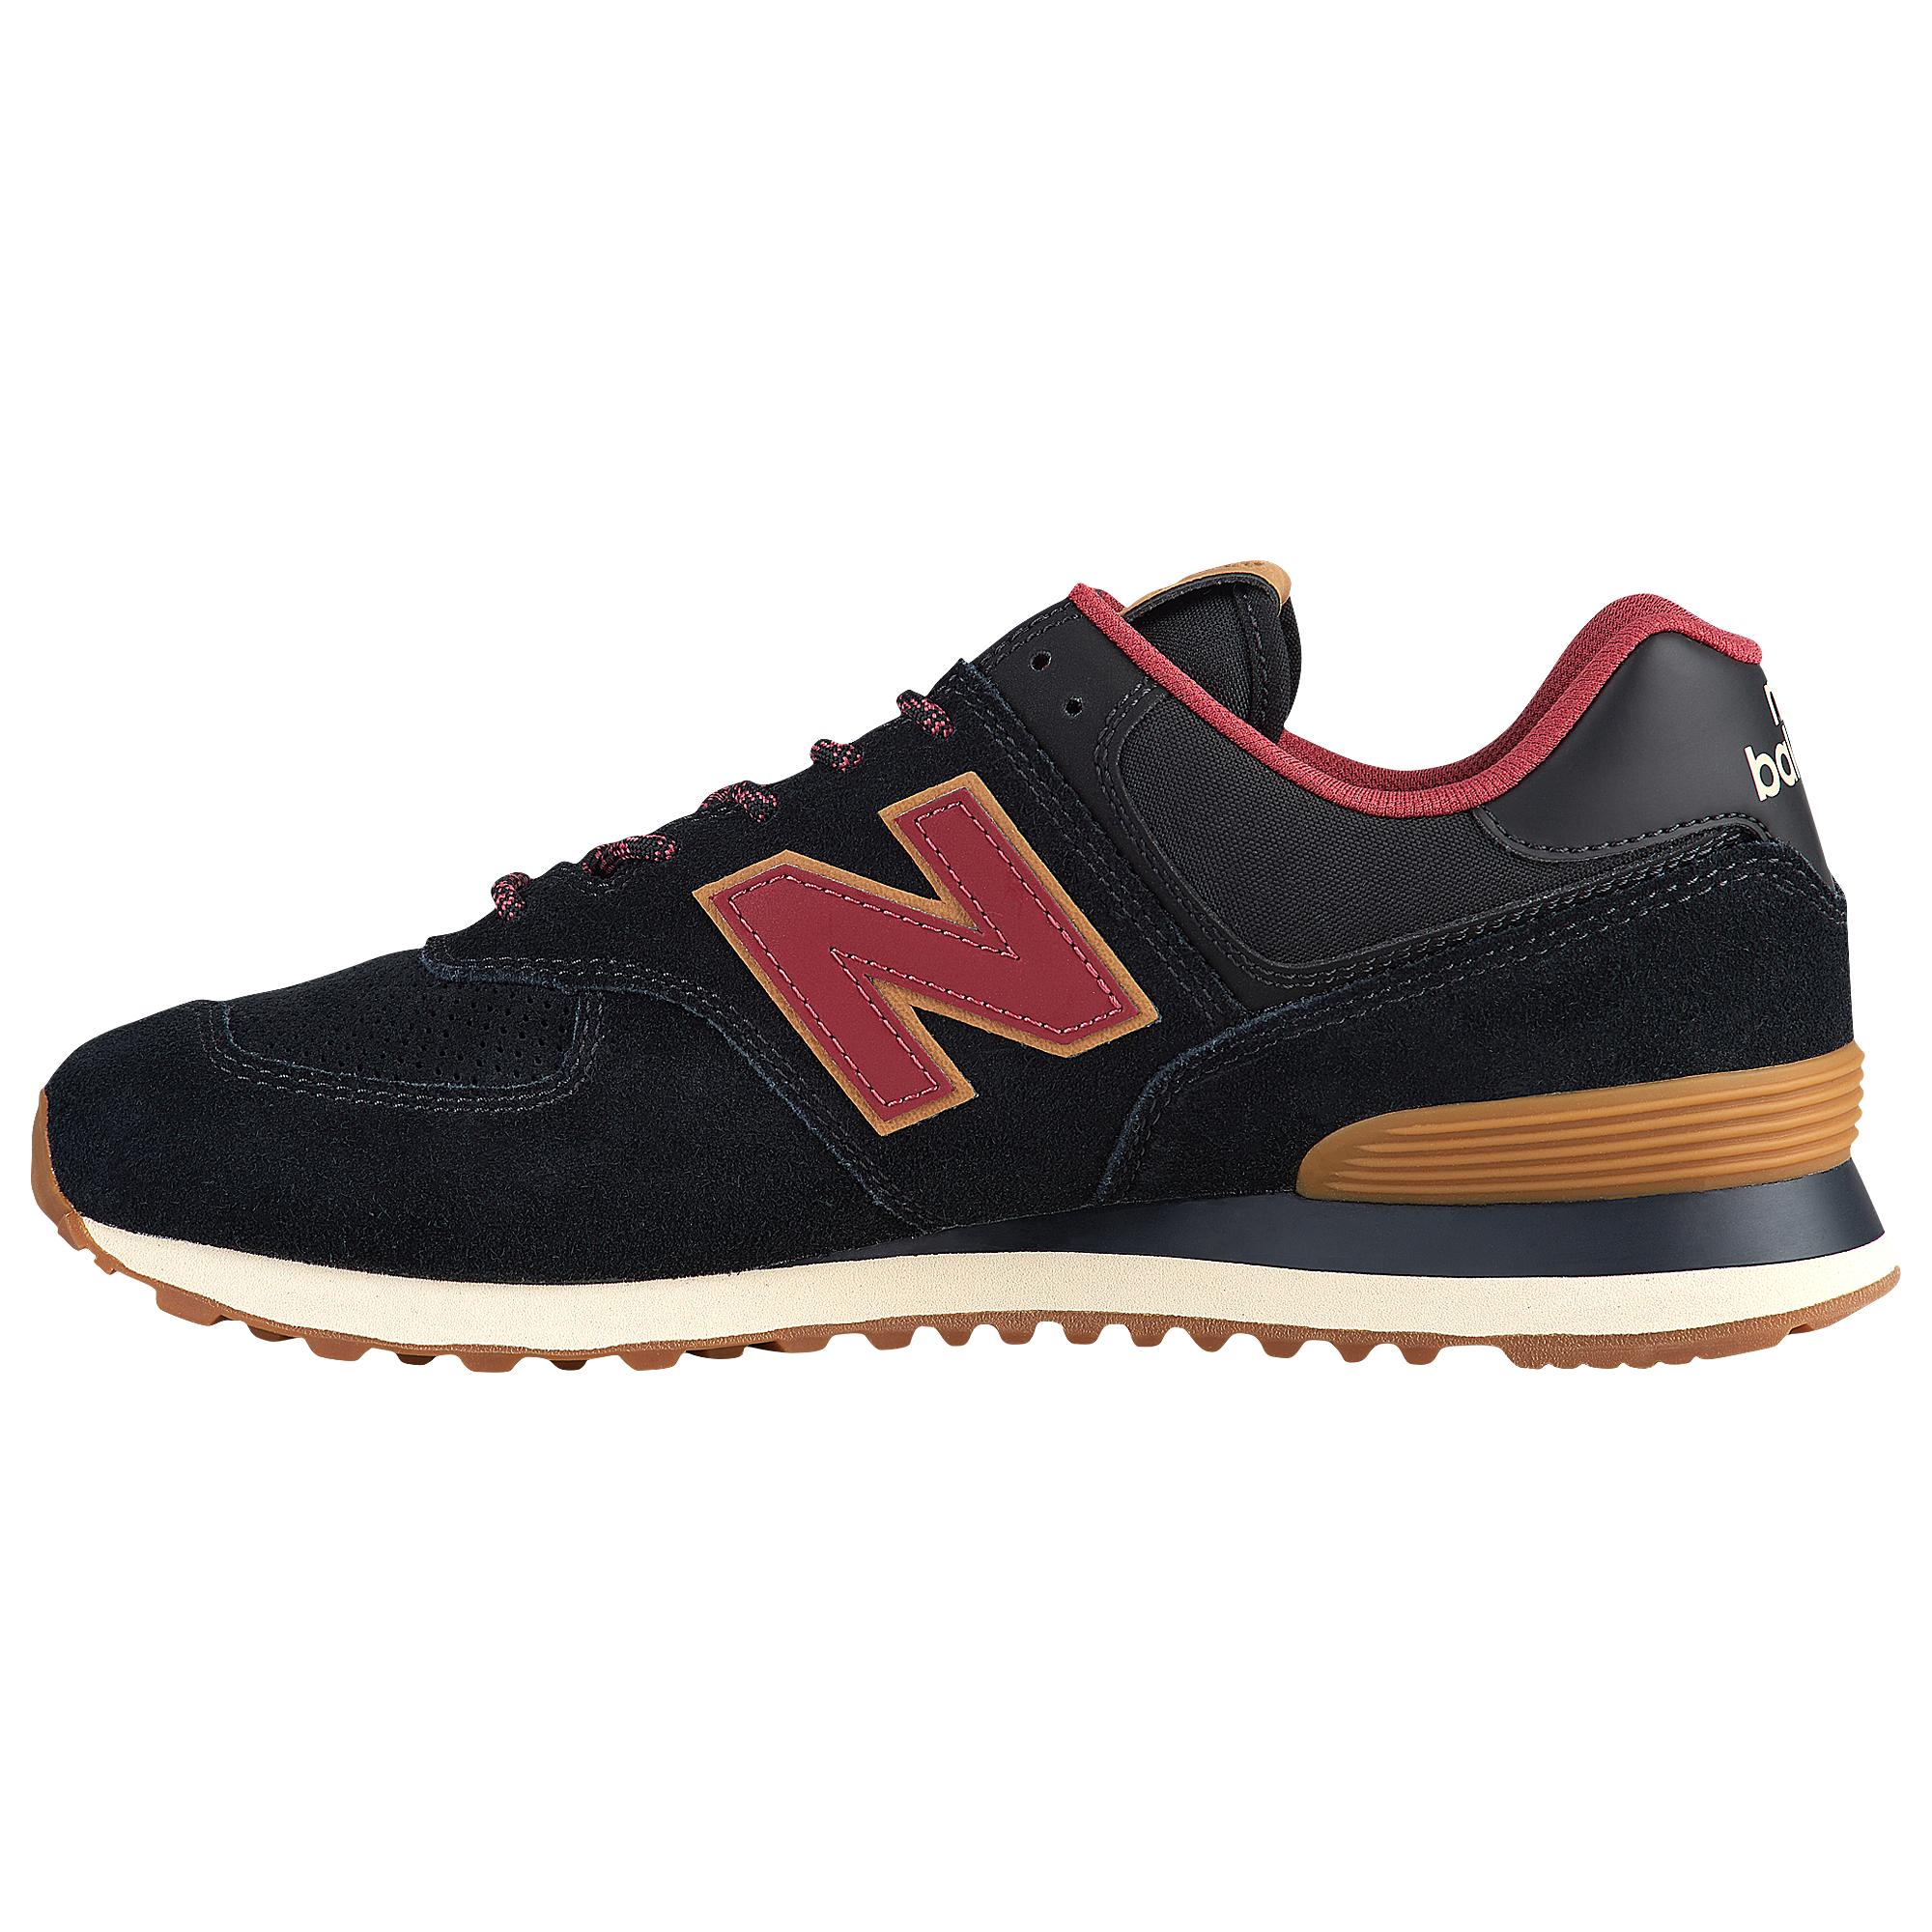 New Balance Leather 574 Classic Running Shoes in Black for Men - Lyst